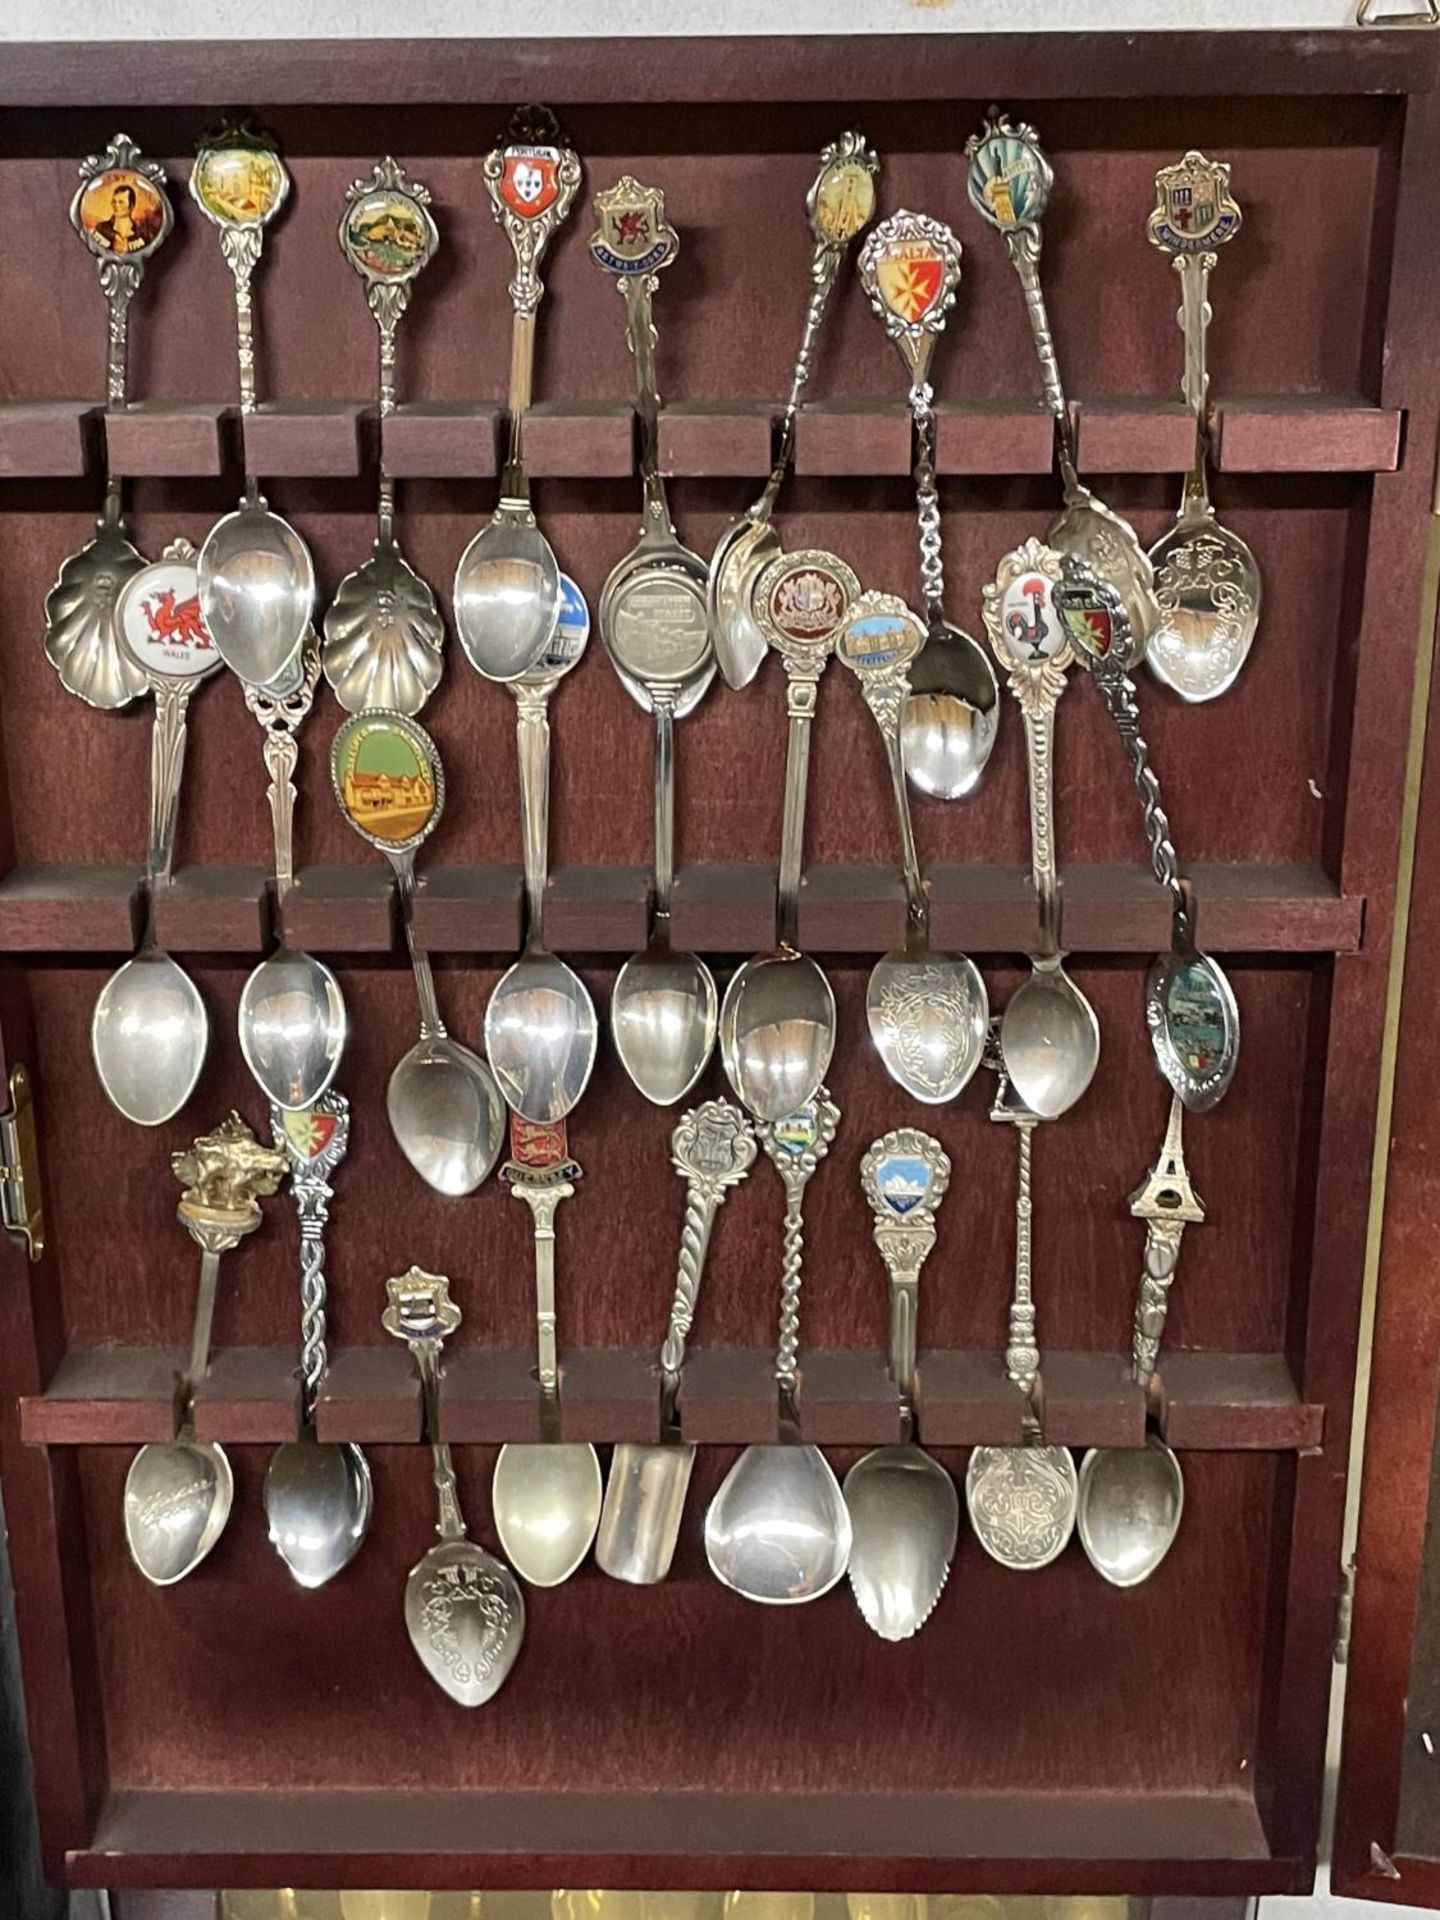 TWO DISPLAY CABINETS CONTAINING SOUVENIR SPOONS - Image 2 of 3